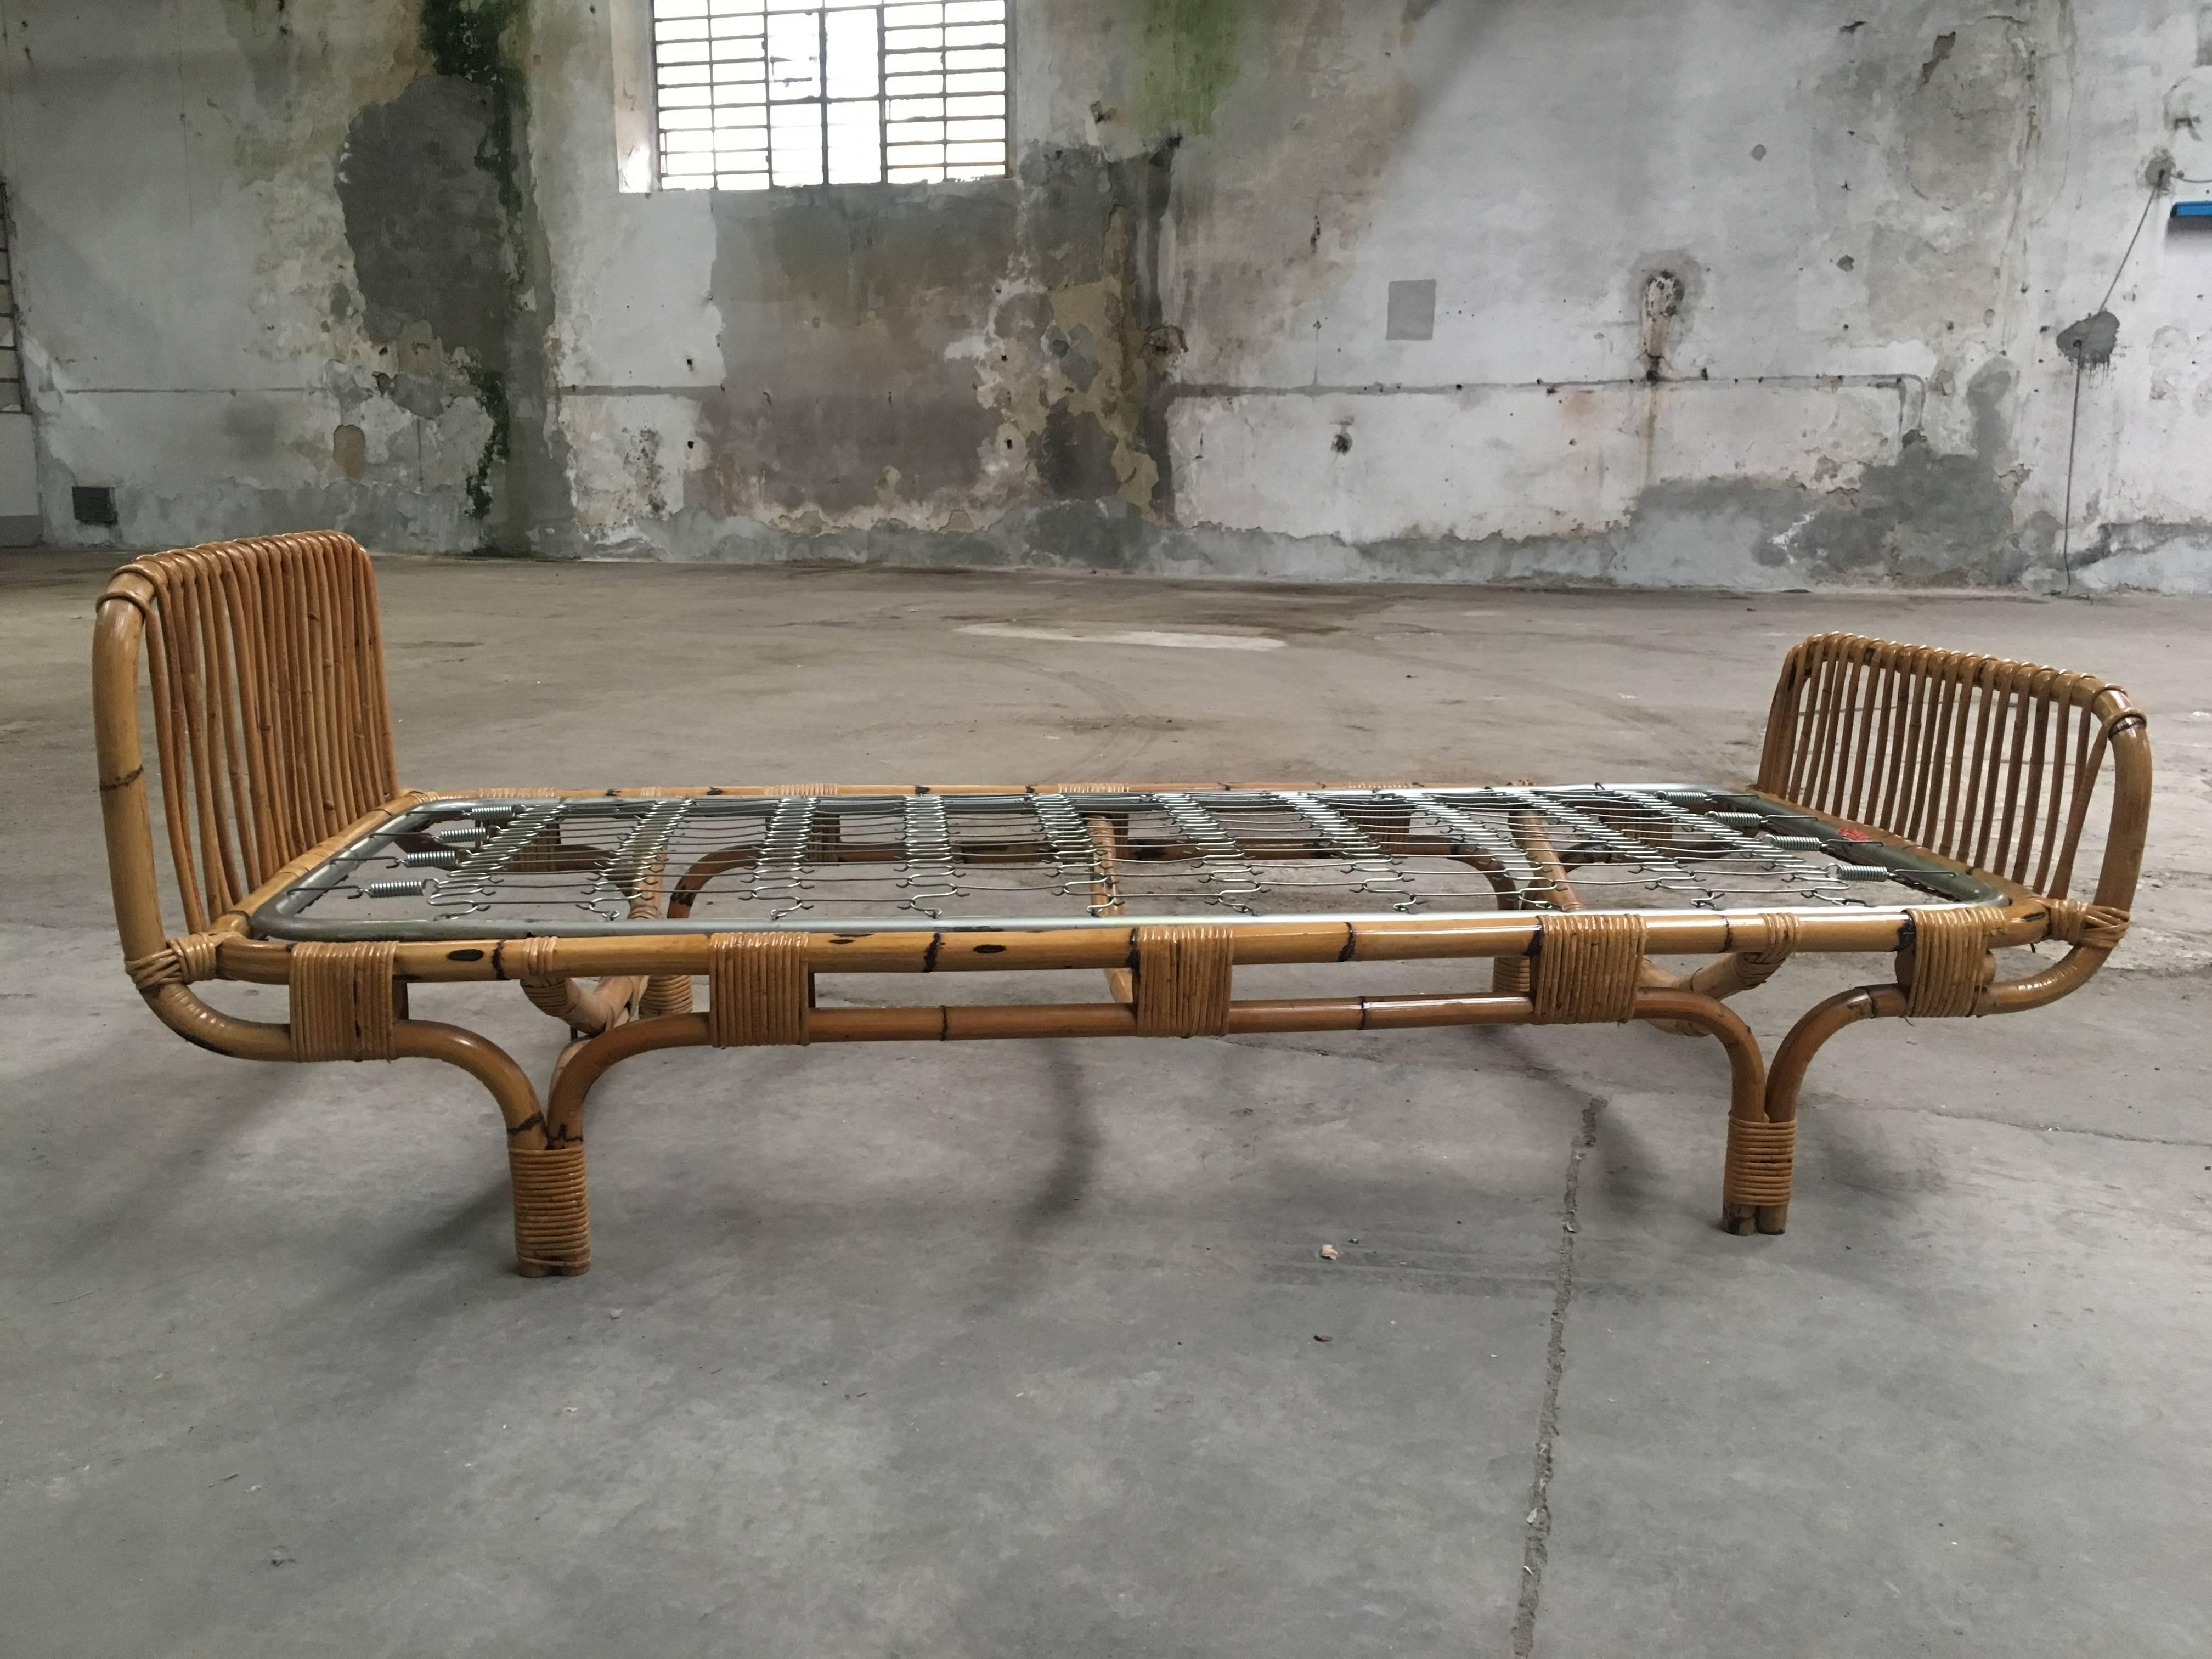 Italian Single bed in bamboo with bed-net from 1960s
Measurements: cm 90 x 212 x H 37 (upper bed frame height cm.72 - lower bed frame height cm.60)
This bed come with a mattress cm 80 x 190 included in the price.